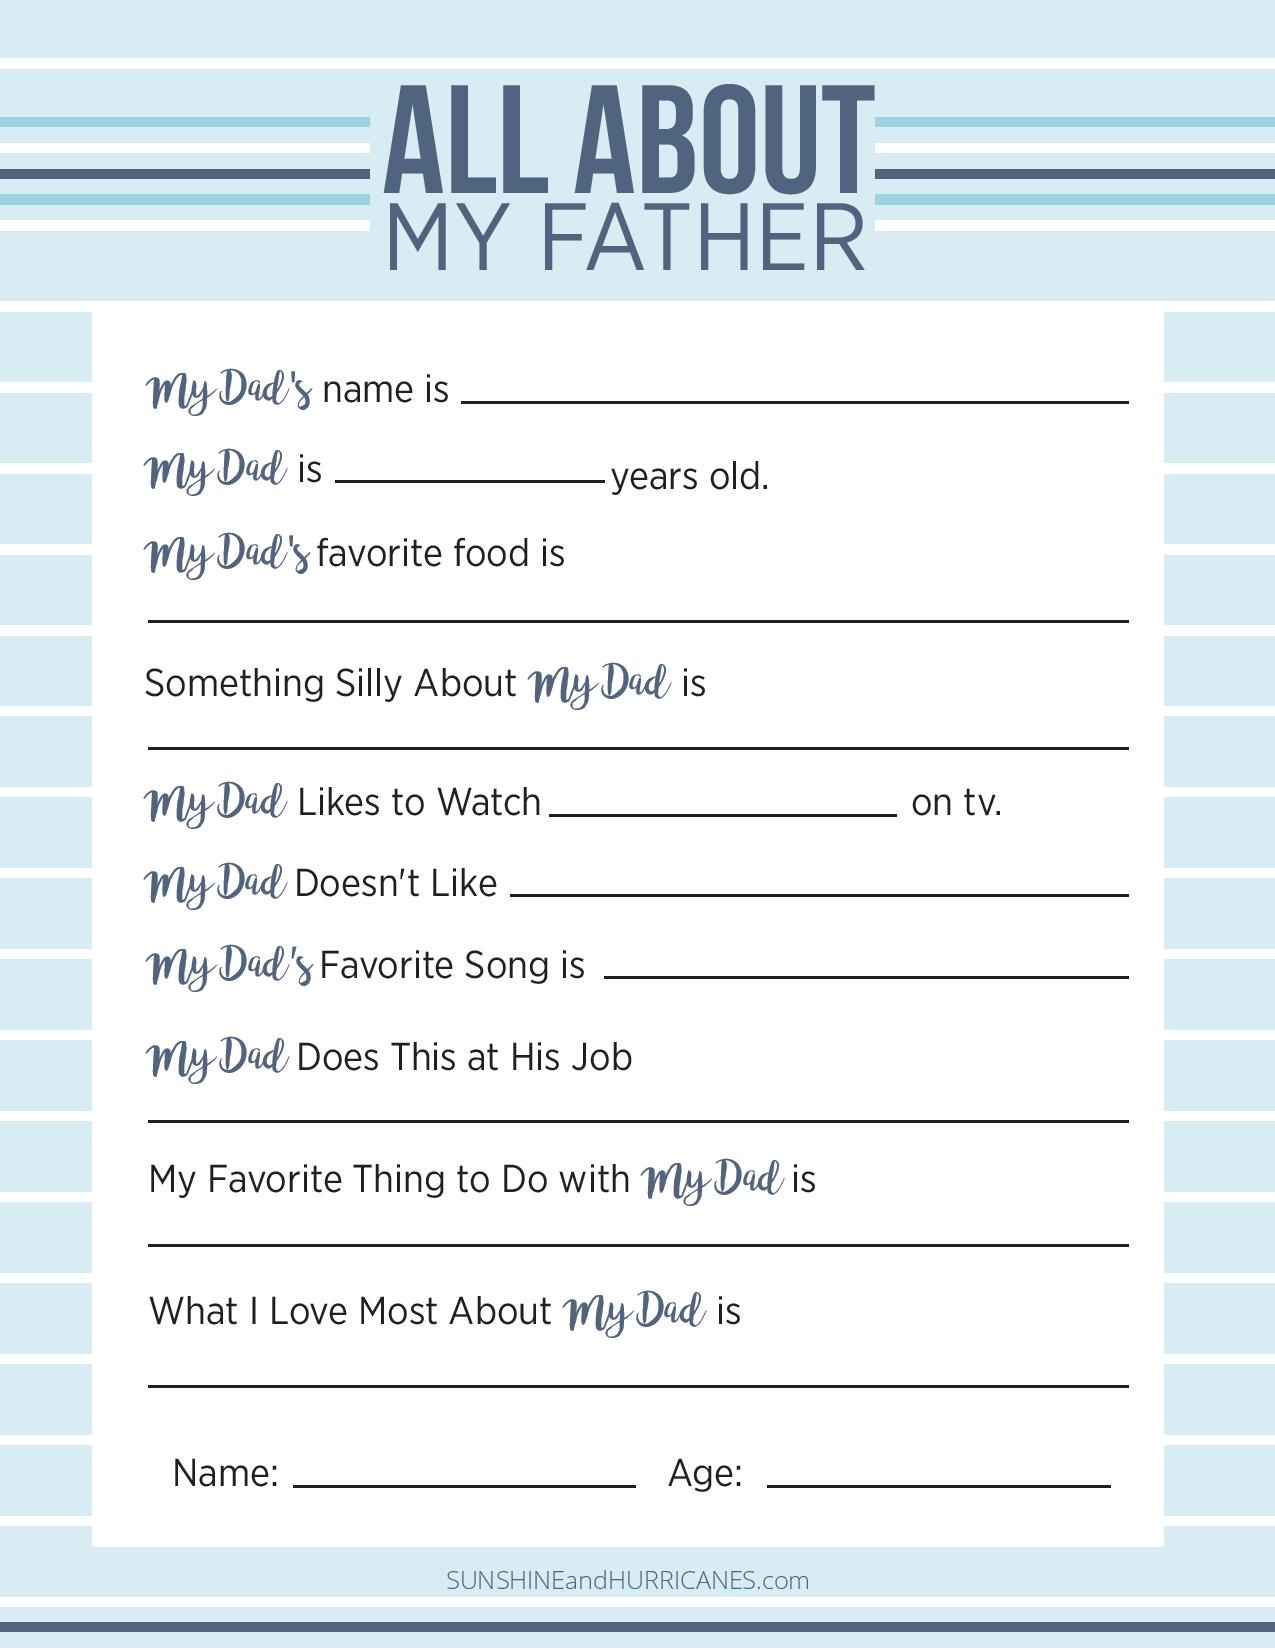 all-about-my-dad-a-printable-father-s-day-questionnaire